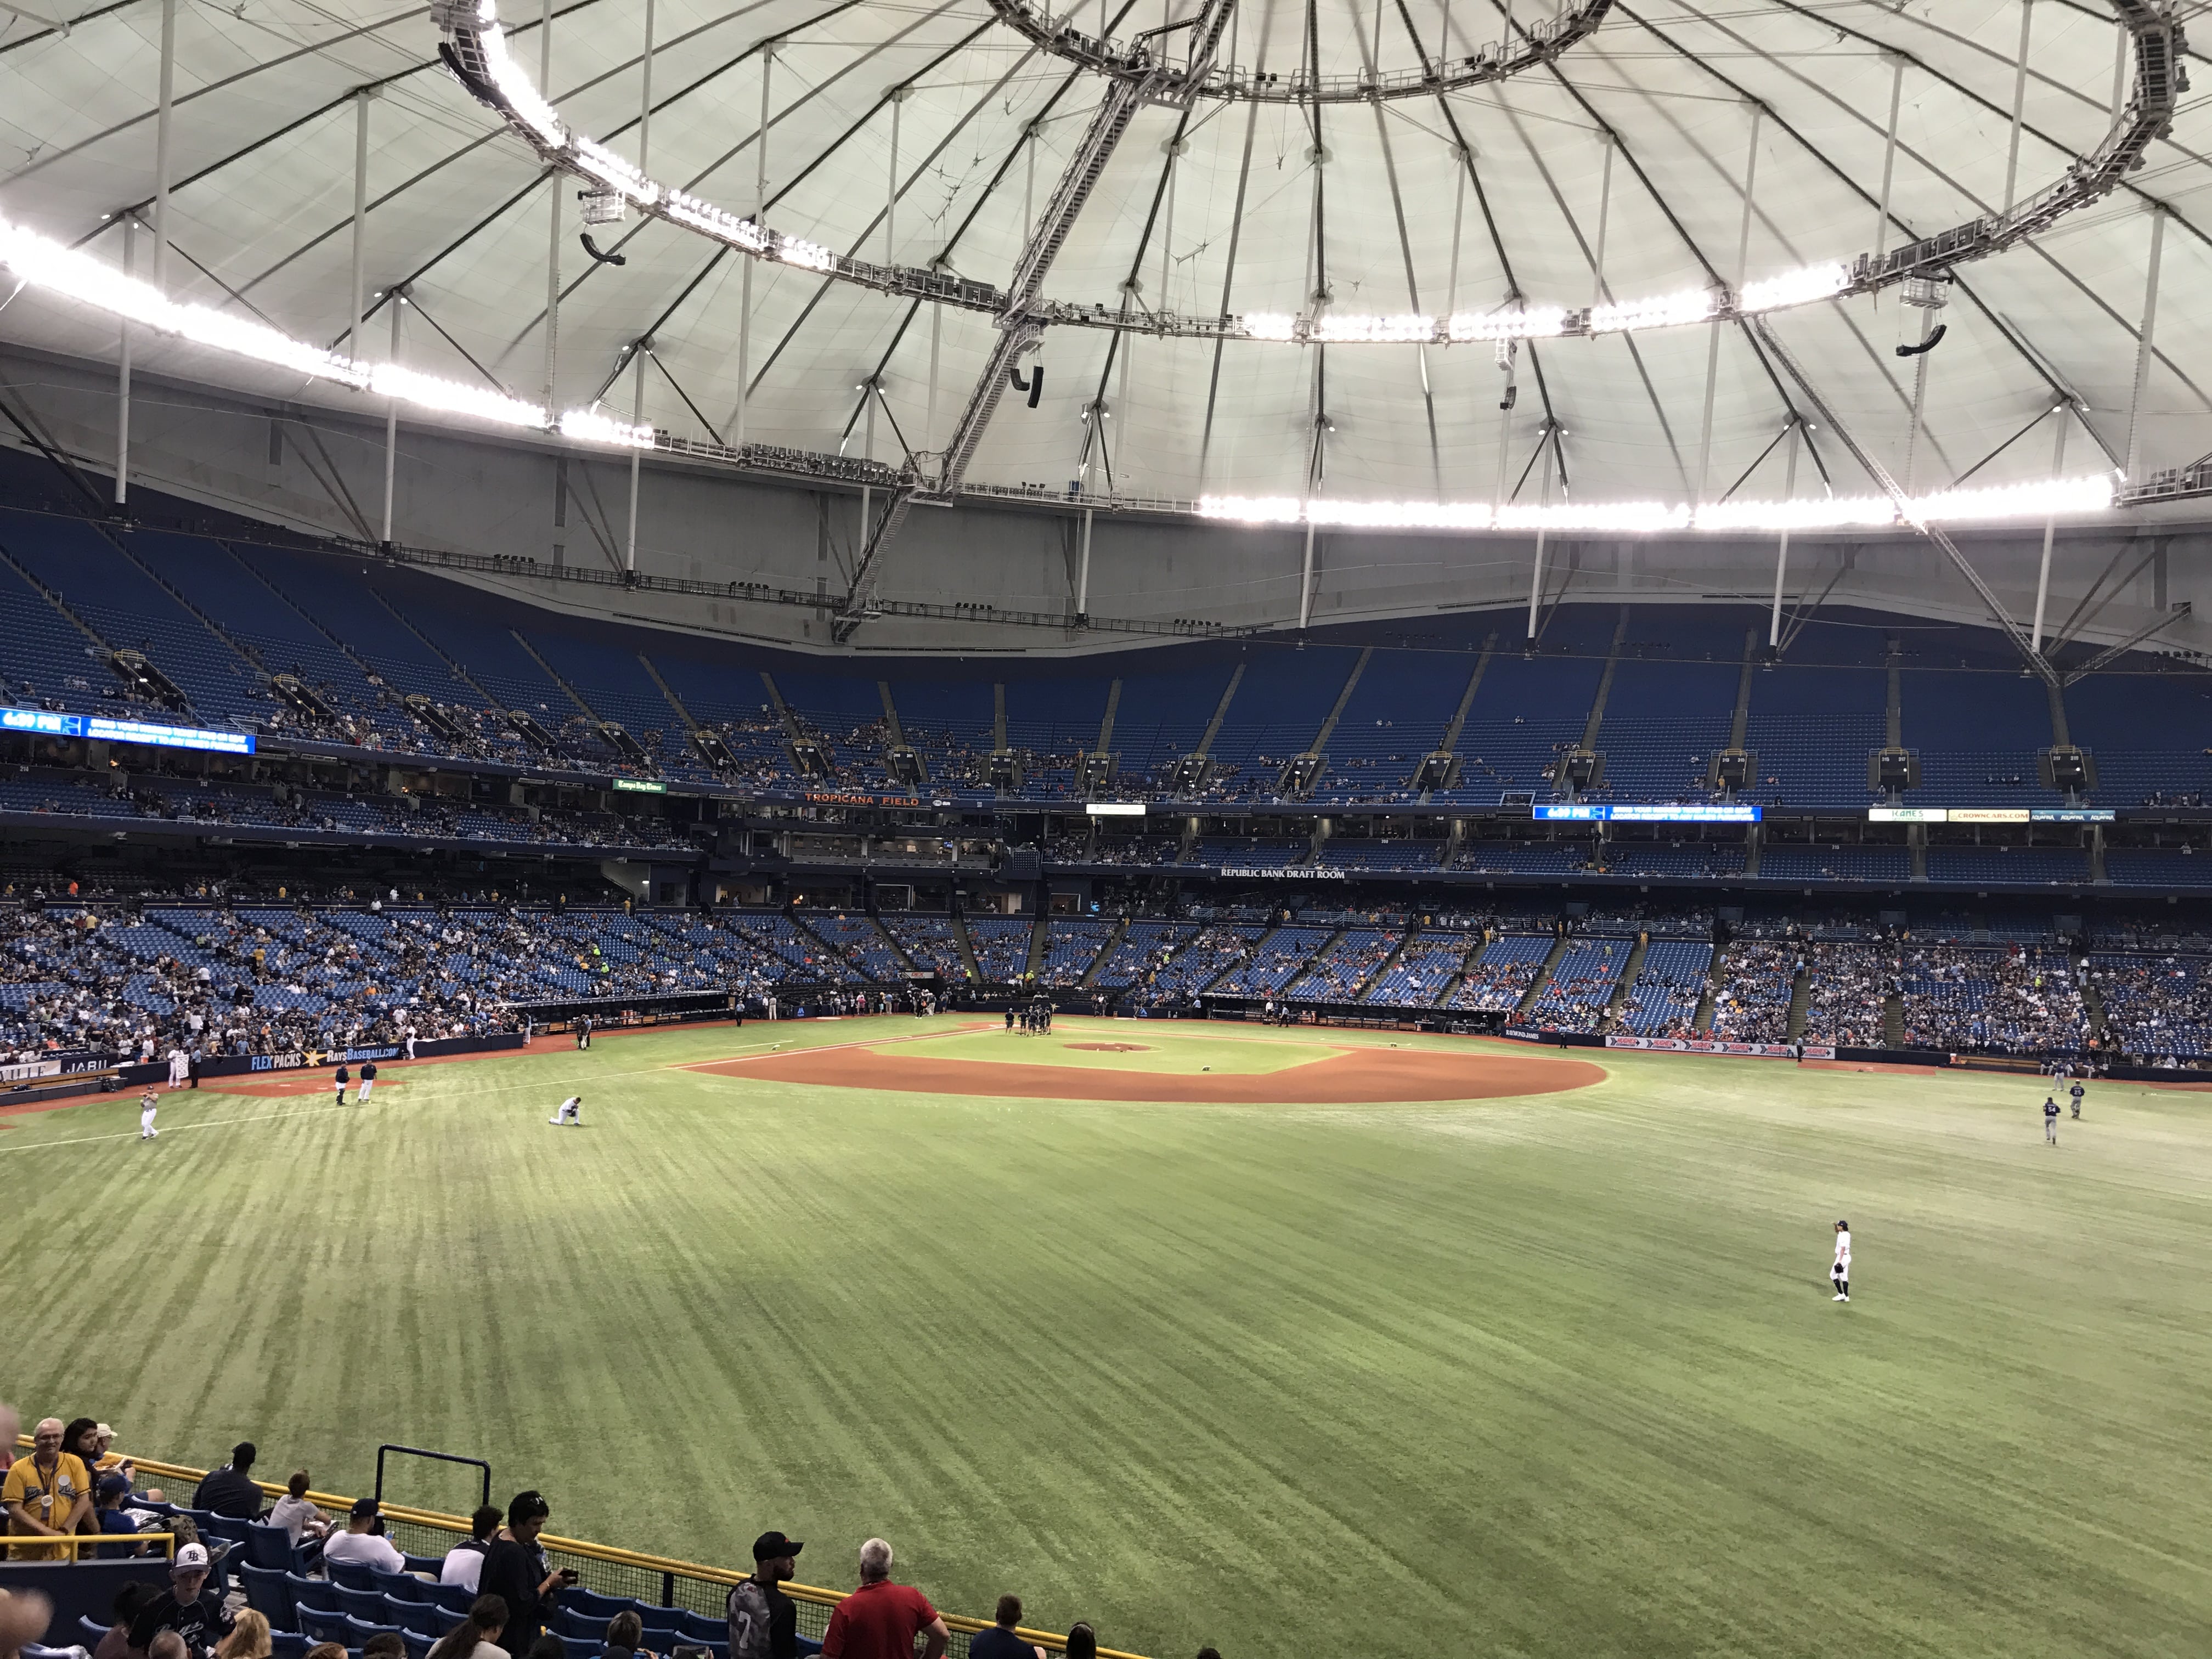 Rays announce ticket specials for 2018 season